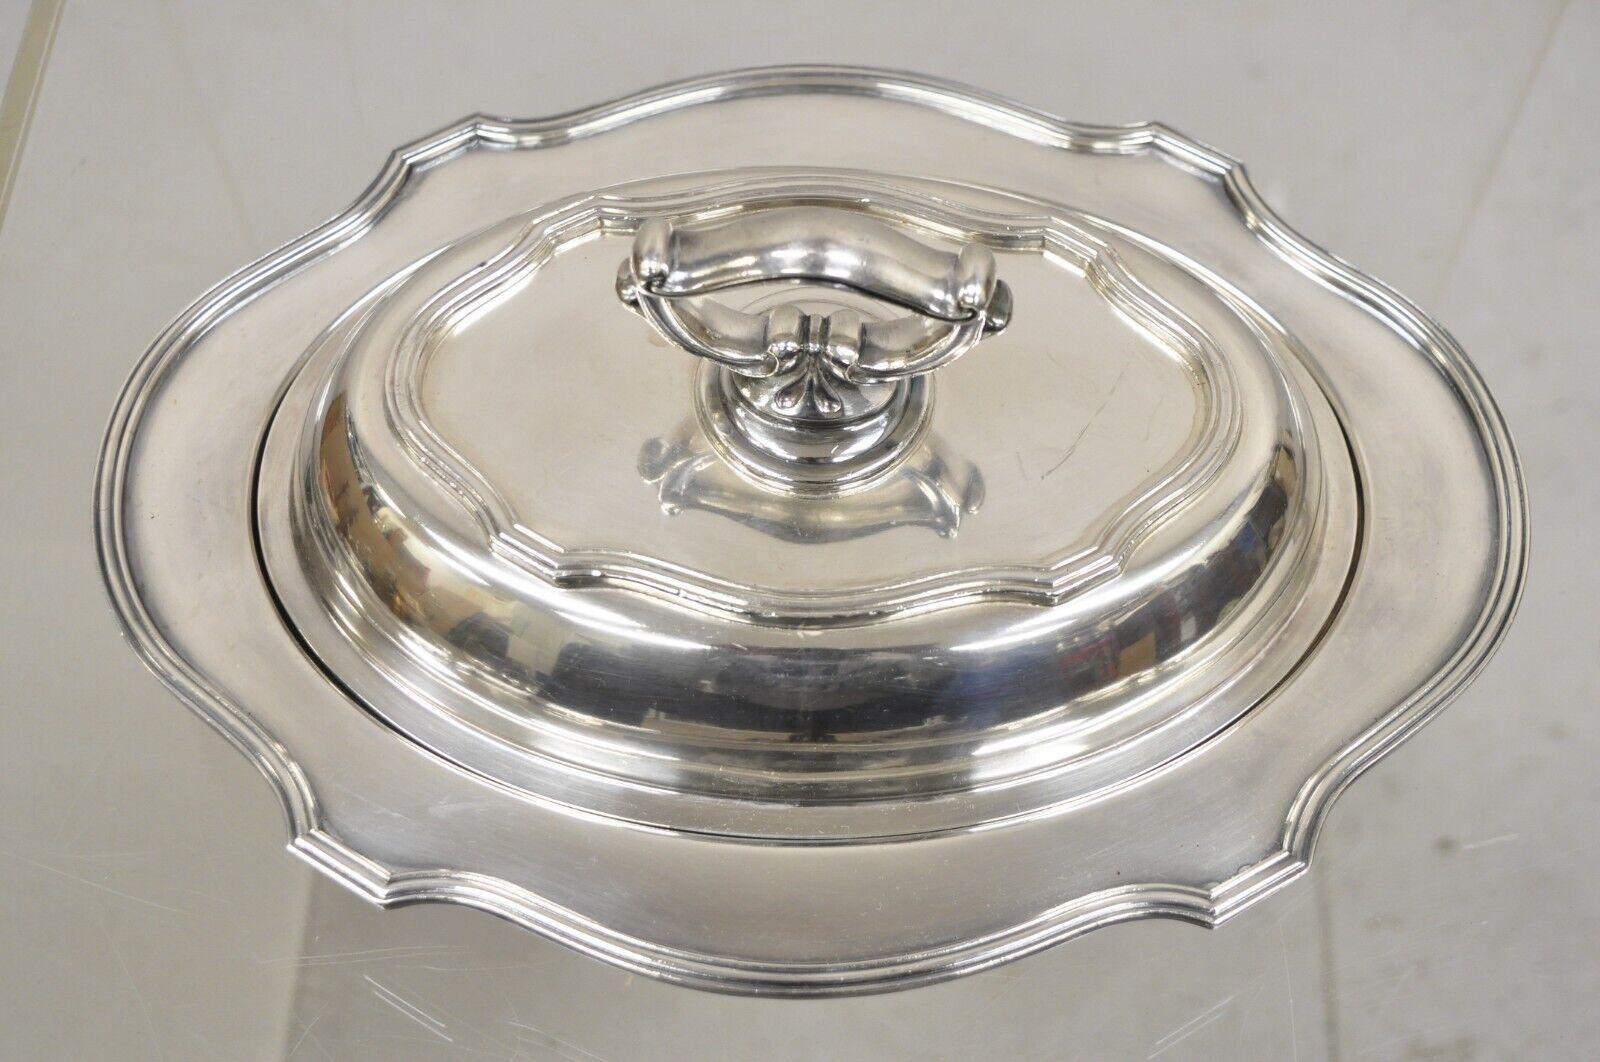 Vintage LBS Co Sheffield Silver Plated Lidded Vegetable Serving Dish. Circa Mid 20th Century. Measurements:  4.5